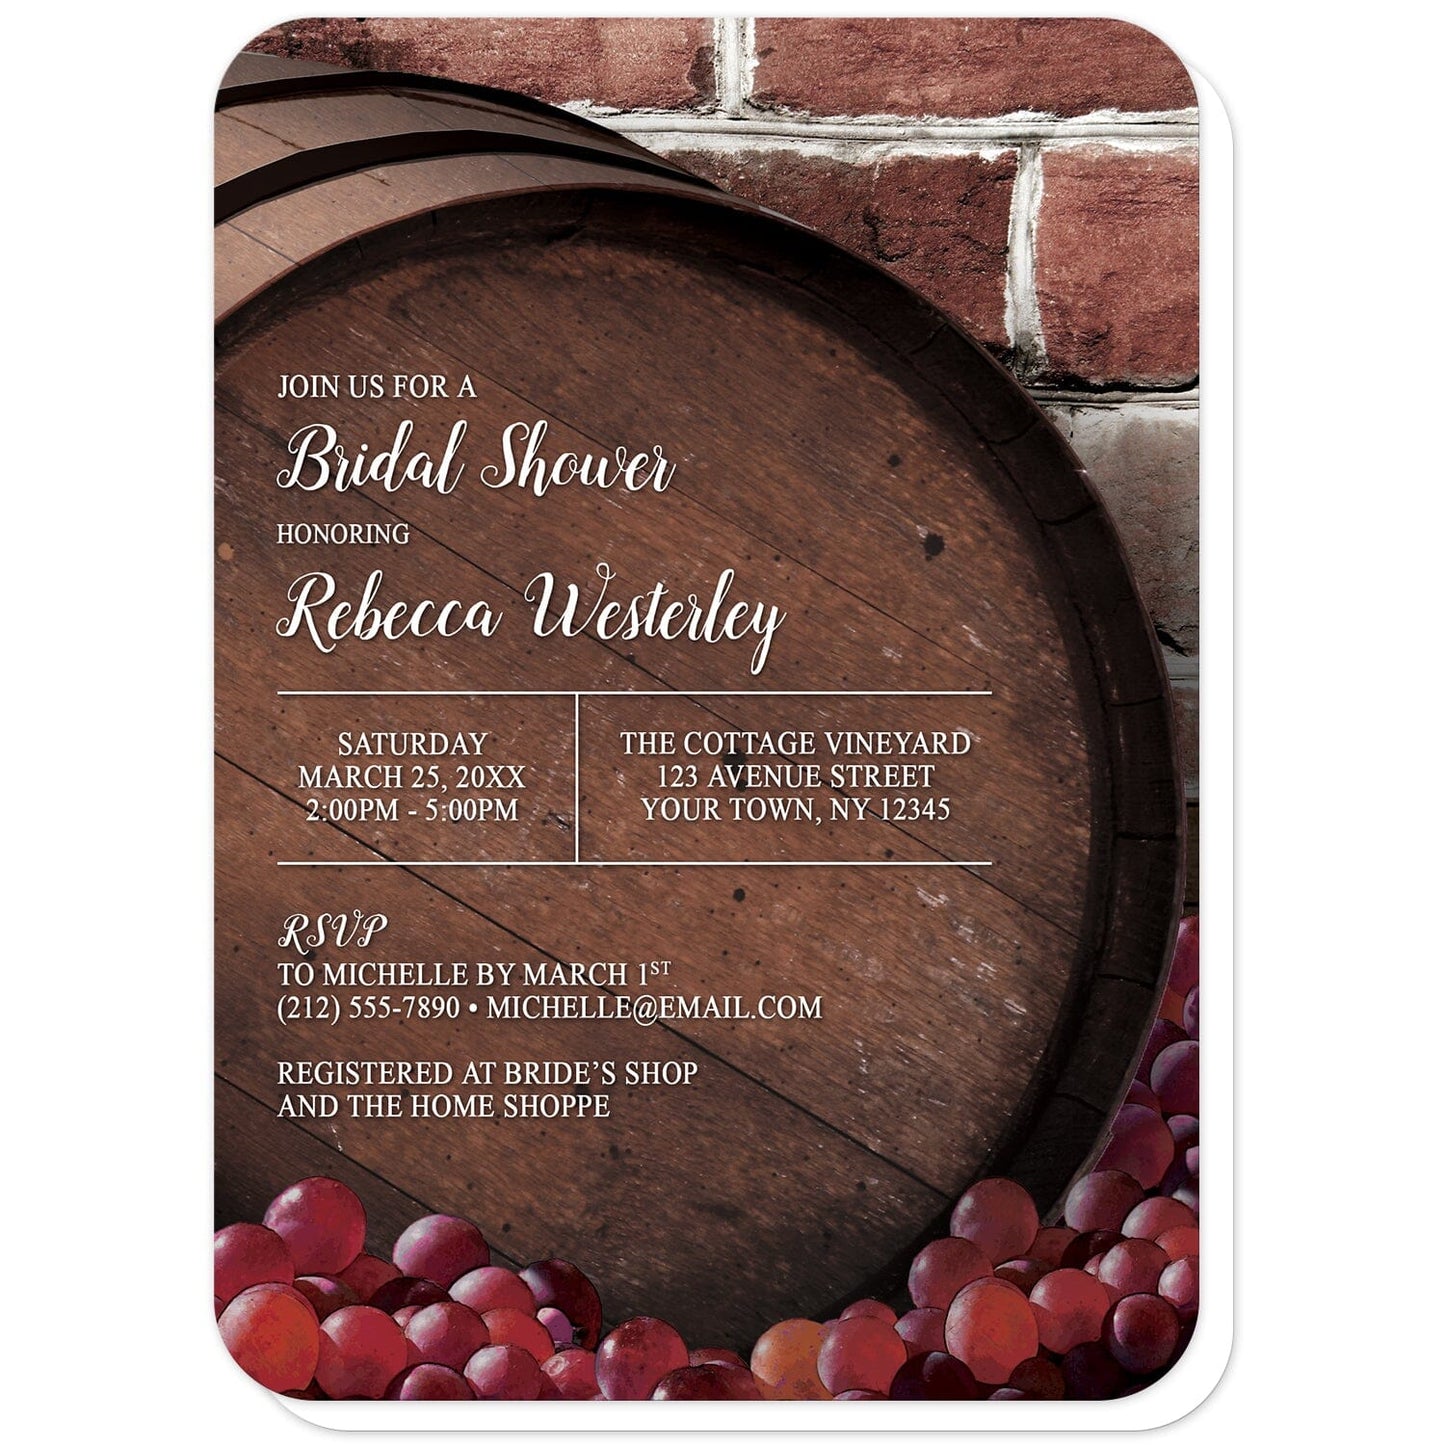 Rustic Wine Barrel Vineyard Bridal Shower Invitations (with rounded corners) at Artistically Invited. Beautiful rustic wine barrel vineyard bridal shower invitations designed with a large wooden wine barrel and grapes illustration in front of a brick pattern background. Your personalized bridal shower celebration details are custom printed in white fonts and grid lines over the top side of the barrel.